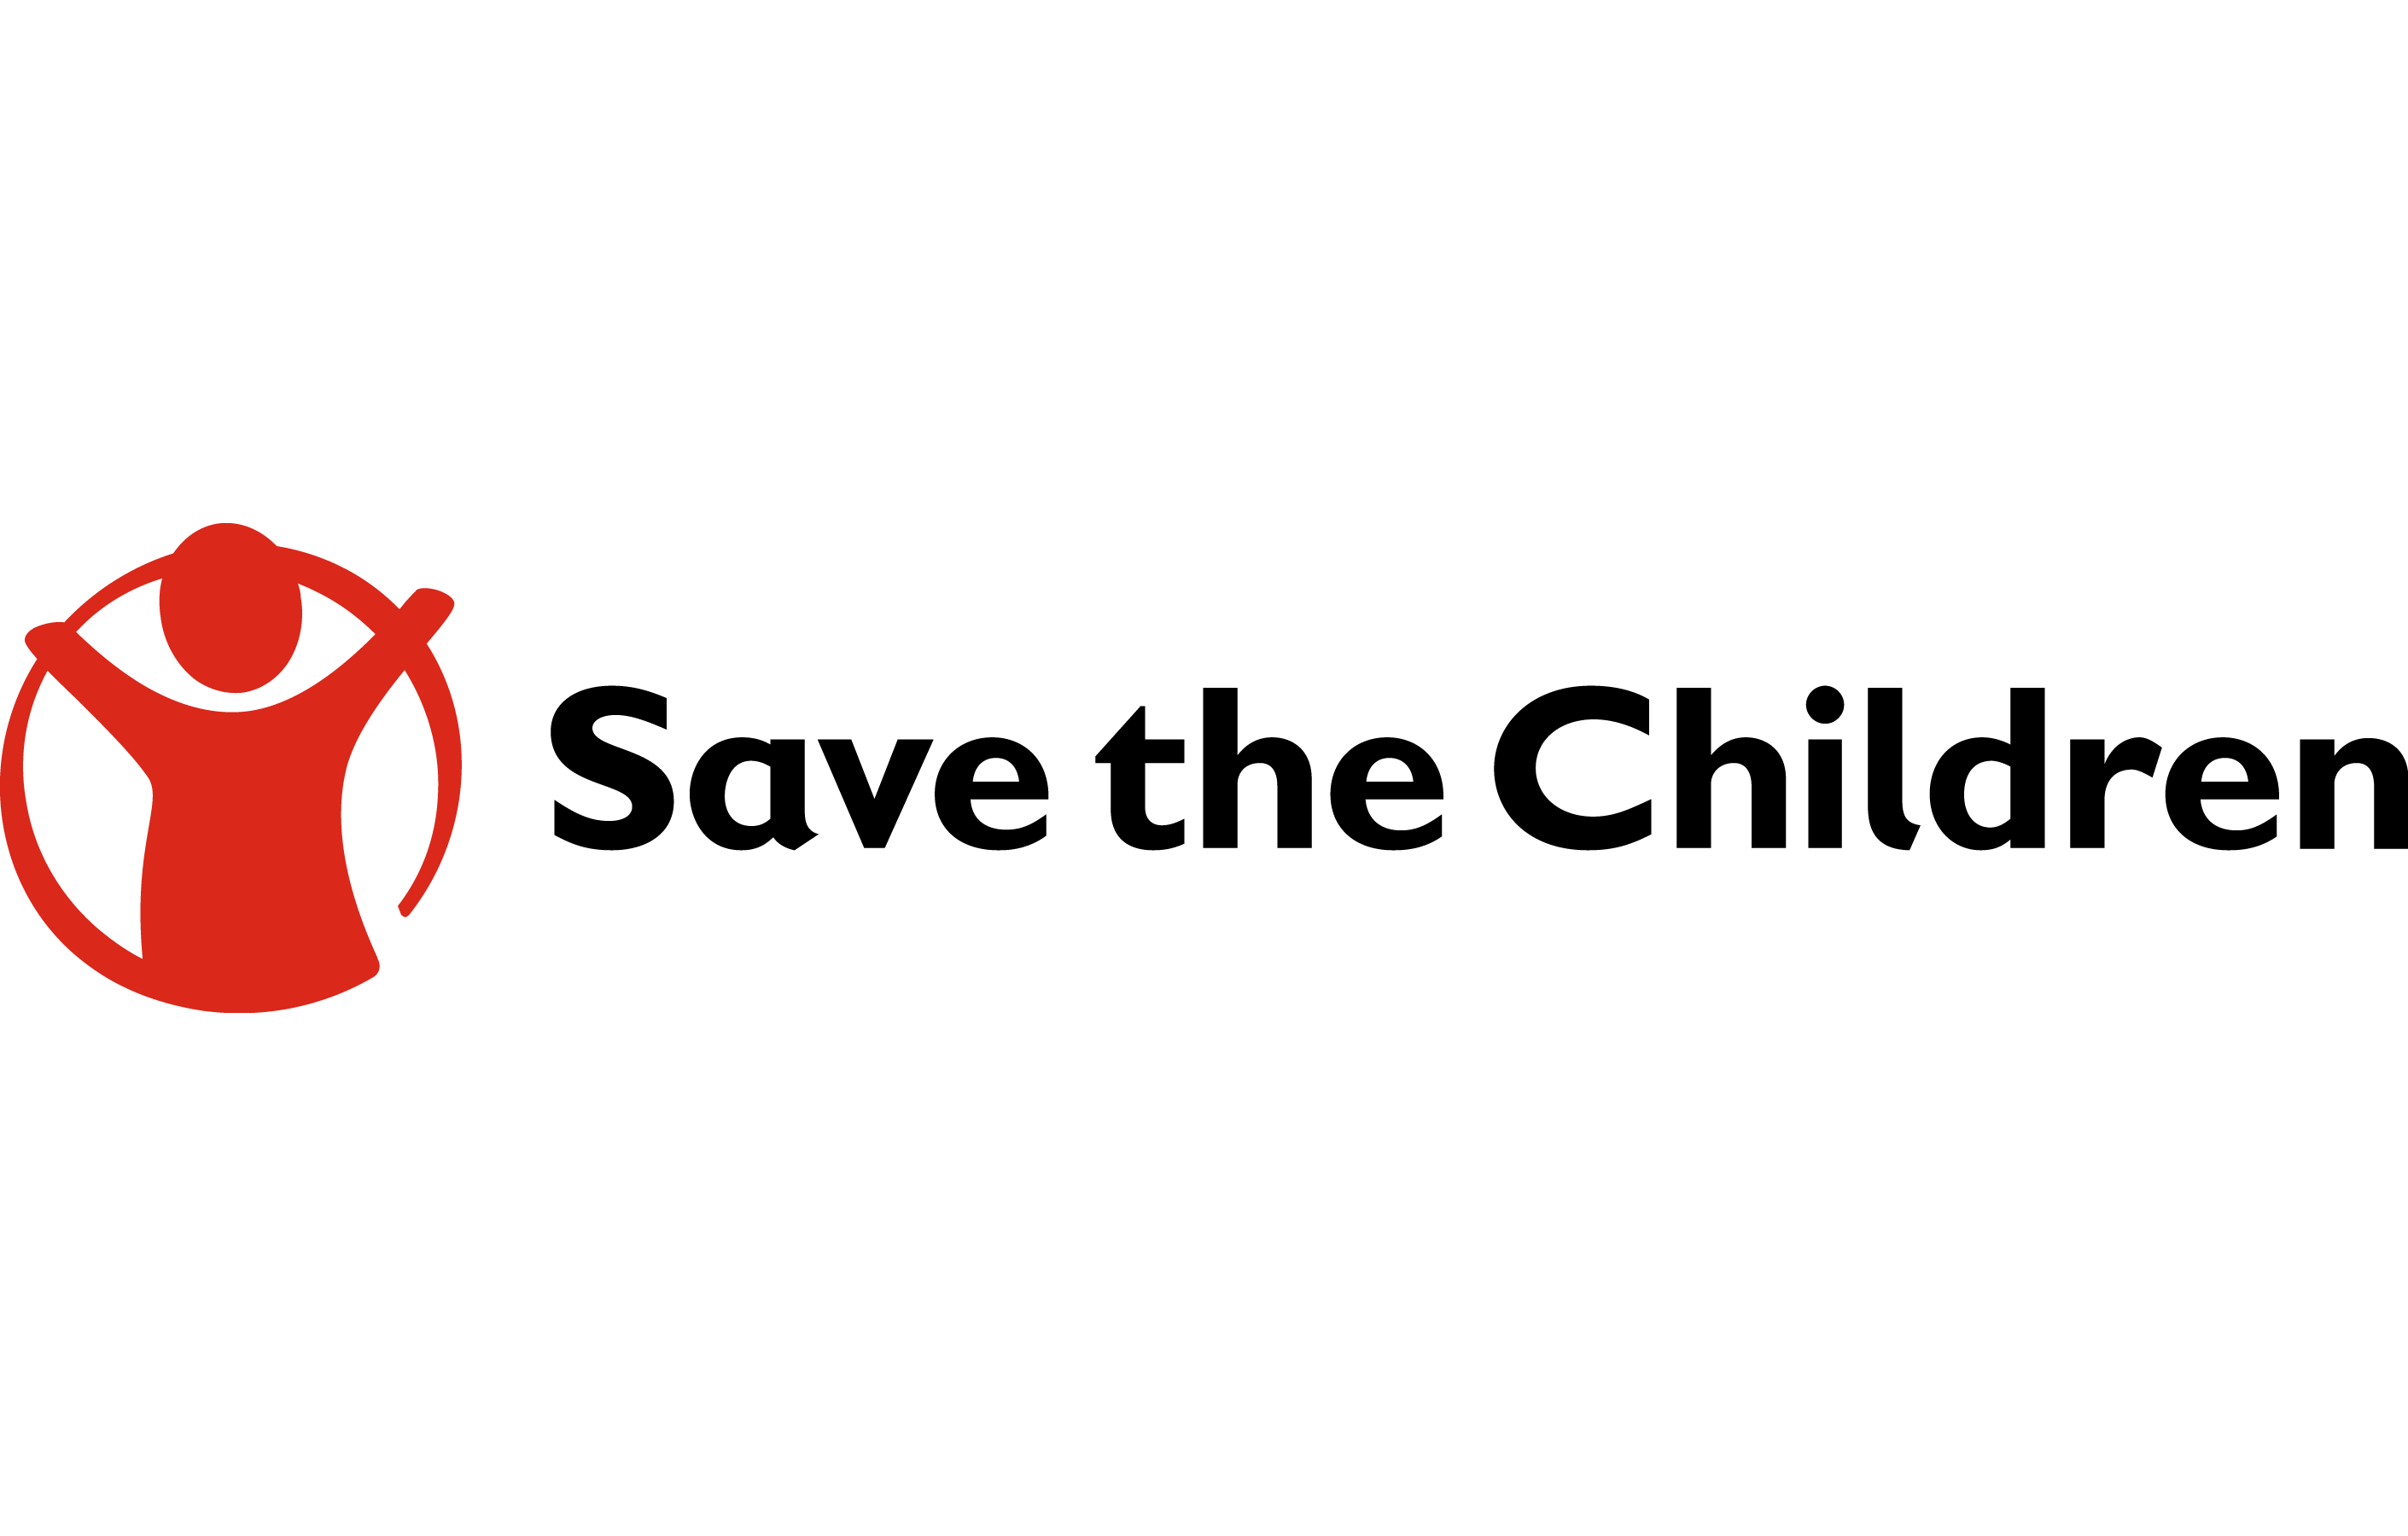 Save the children - MHMPA Nepal